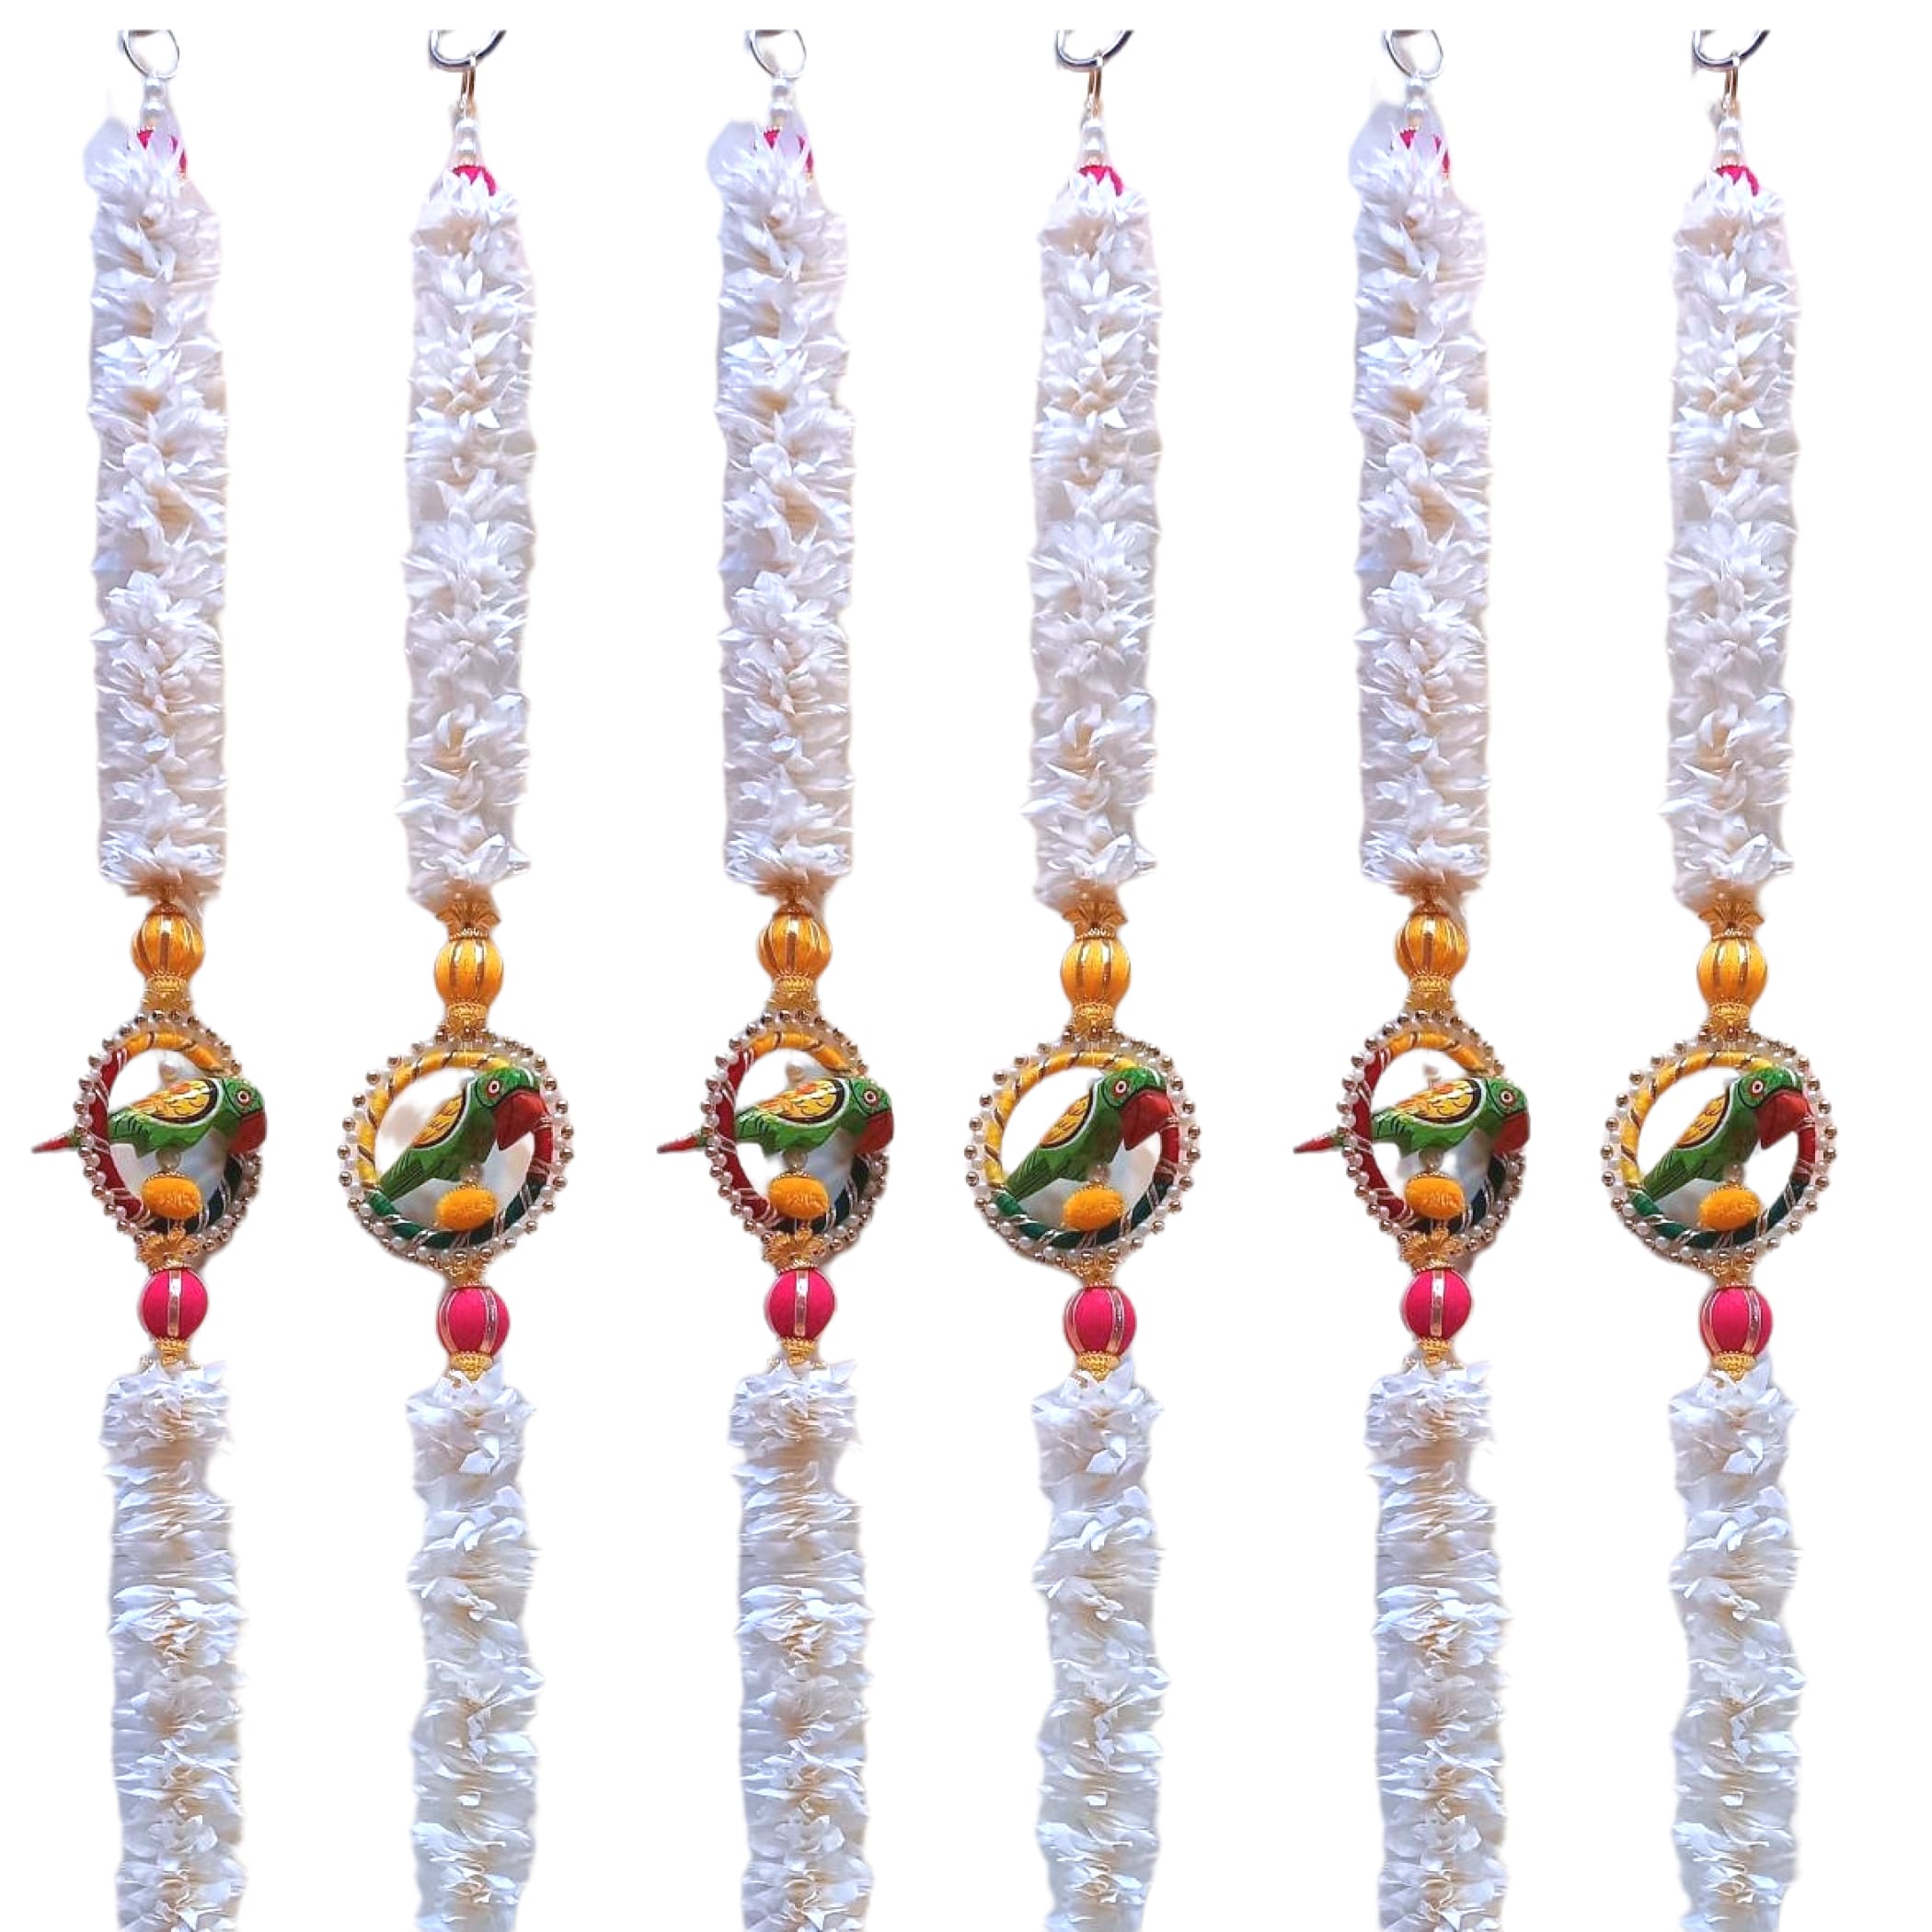 Jasmines parrot strings backdrop hanging artificial floral